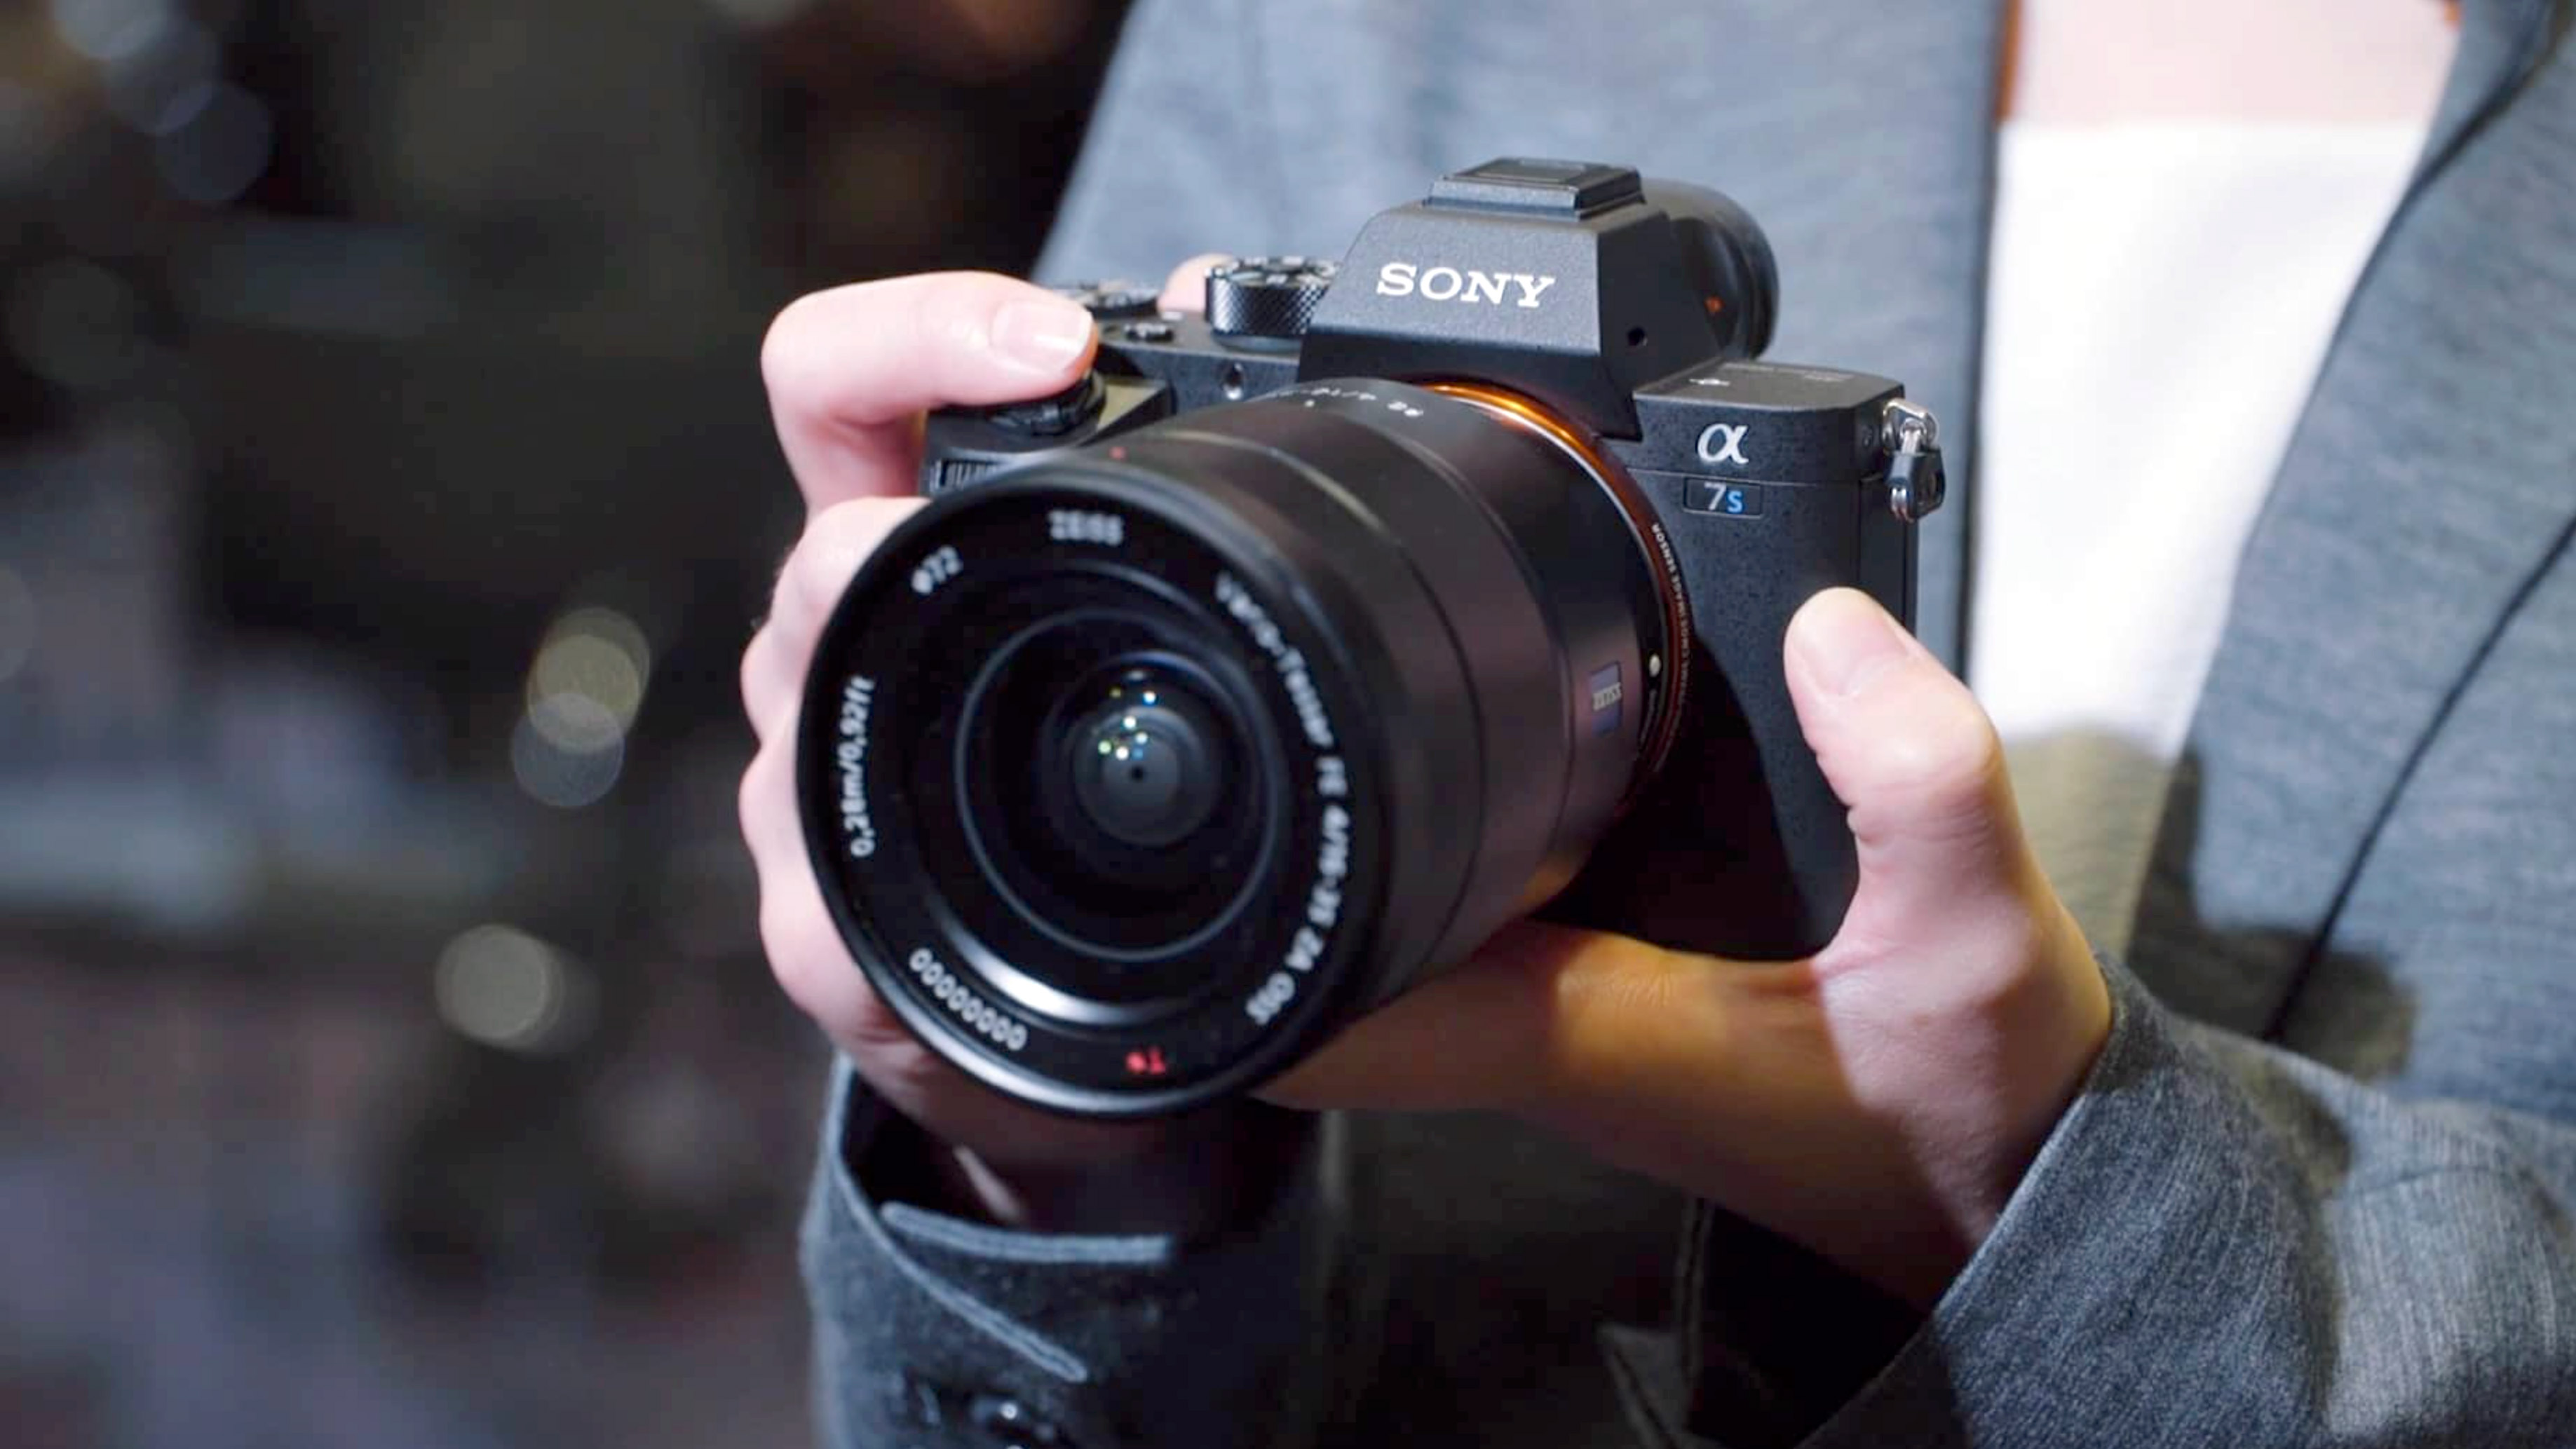 Sony A7sII Hands-On Video - Main Features | cinema5D